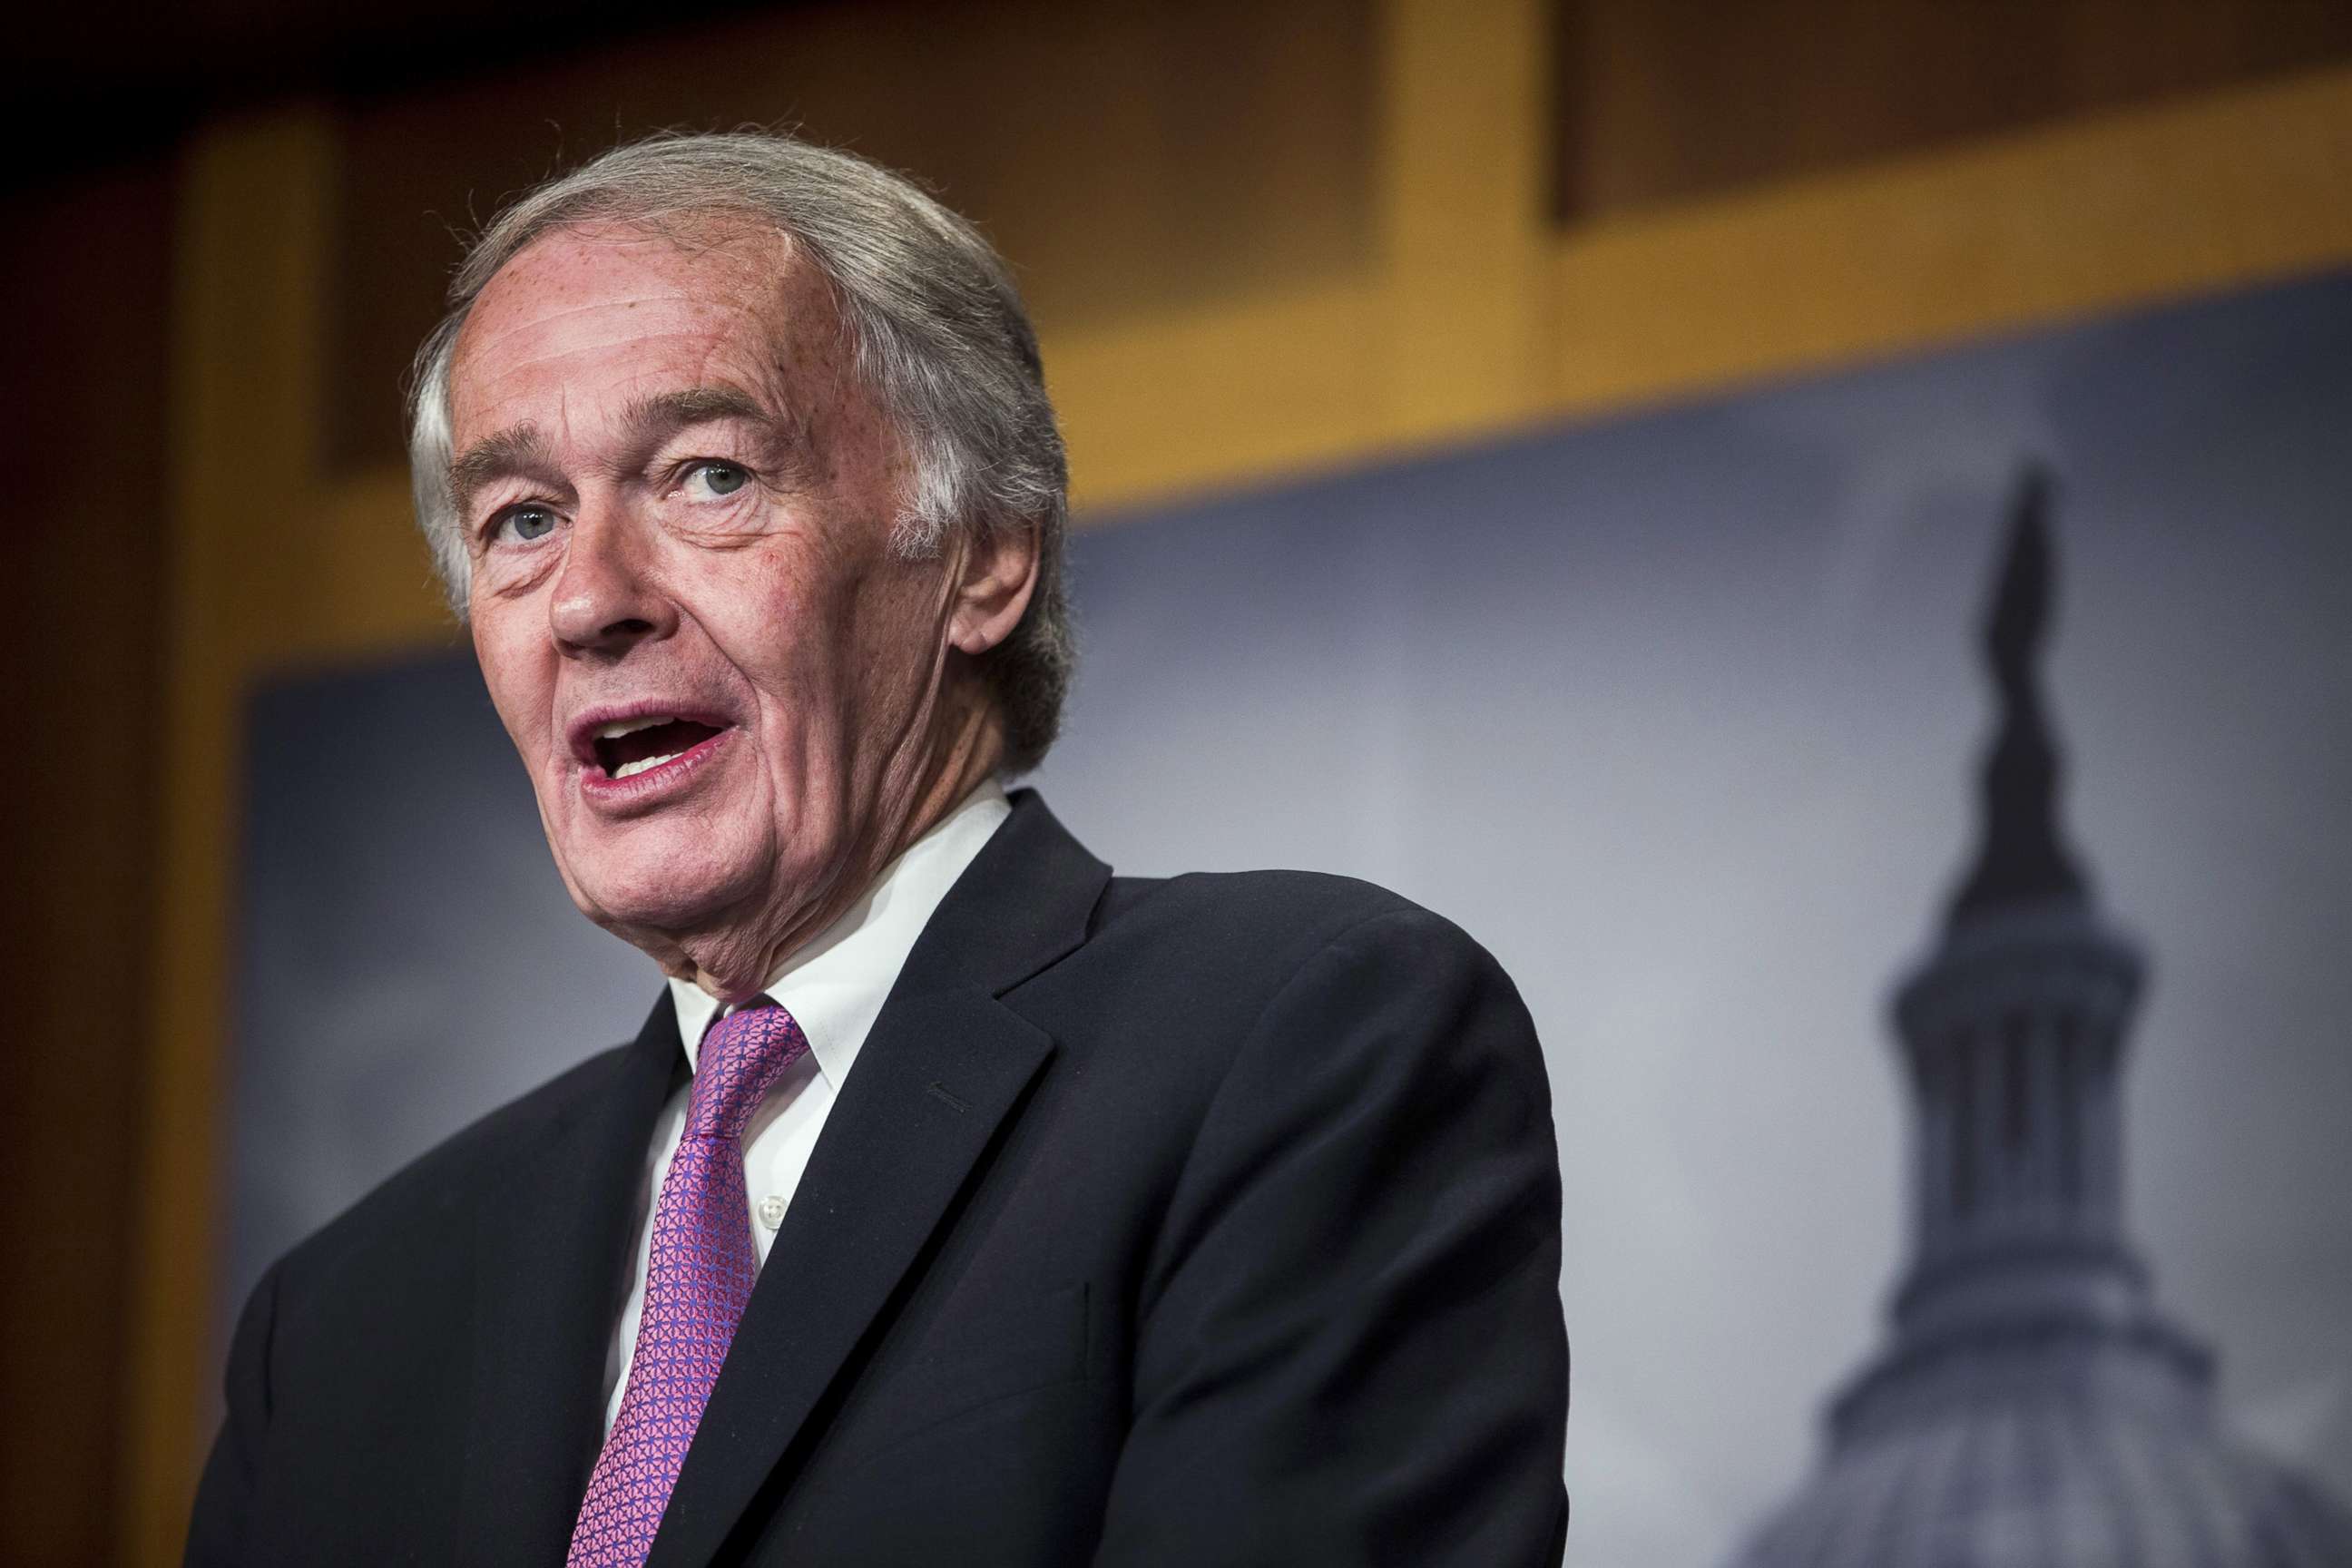 PHOTO: Sen. Ed Markey speaks during a news conference on a petition to force a vote on net neutrality on Capitol Hill in Washington, D.C., May 9, 2018.